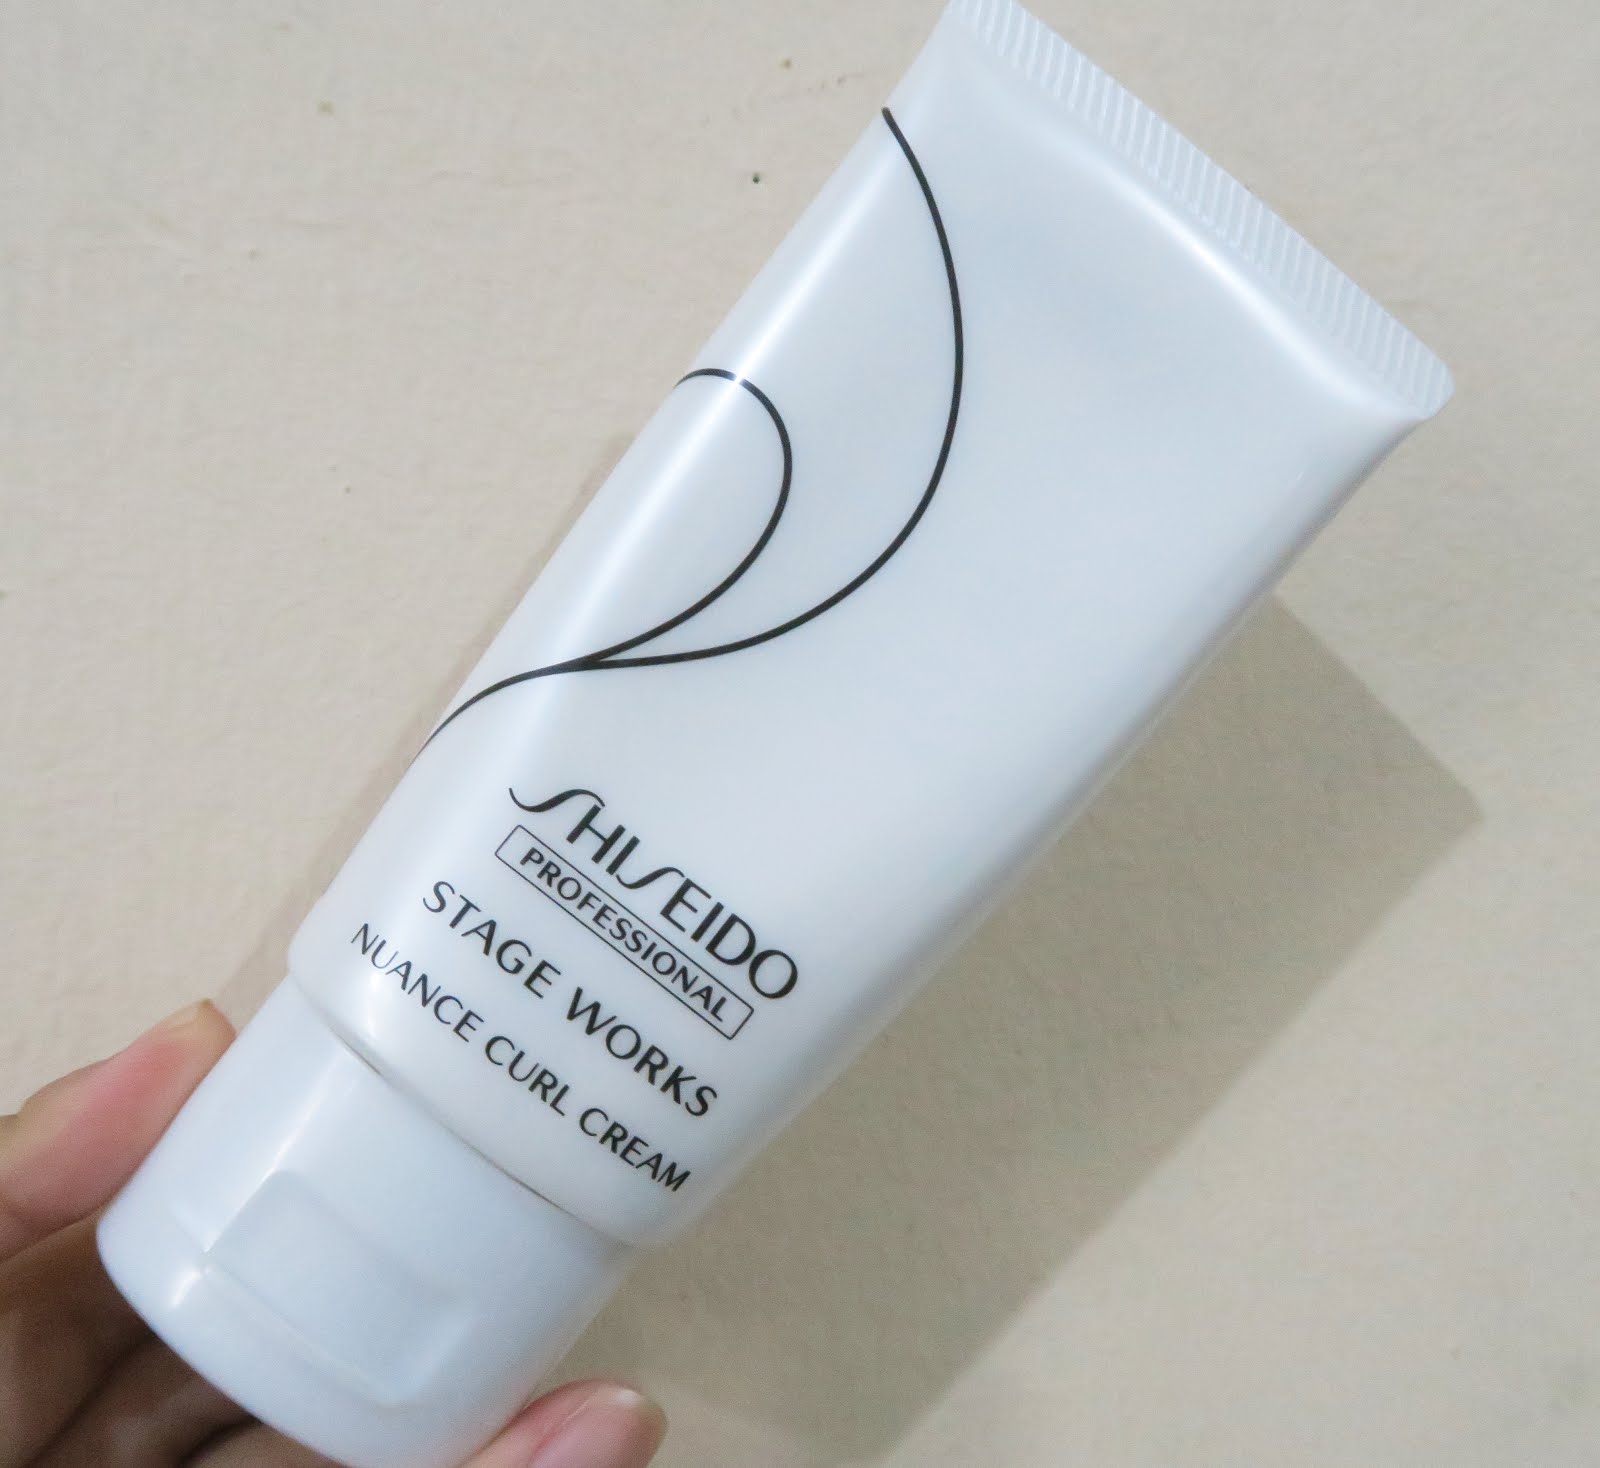 Shiseido nuance curl cream review healthcare timeline of changes